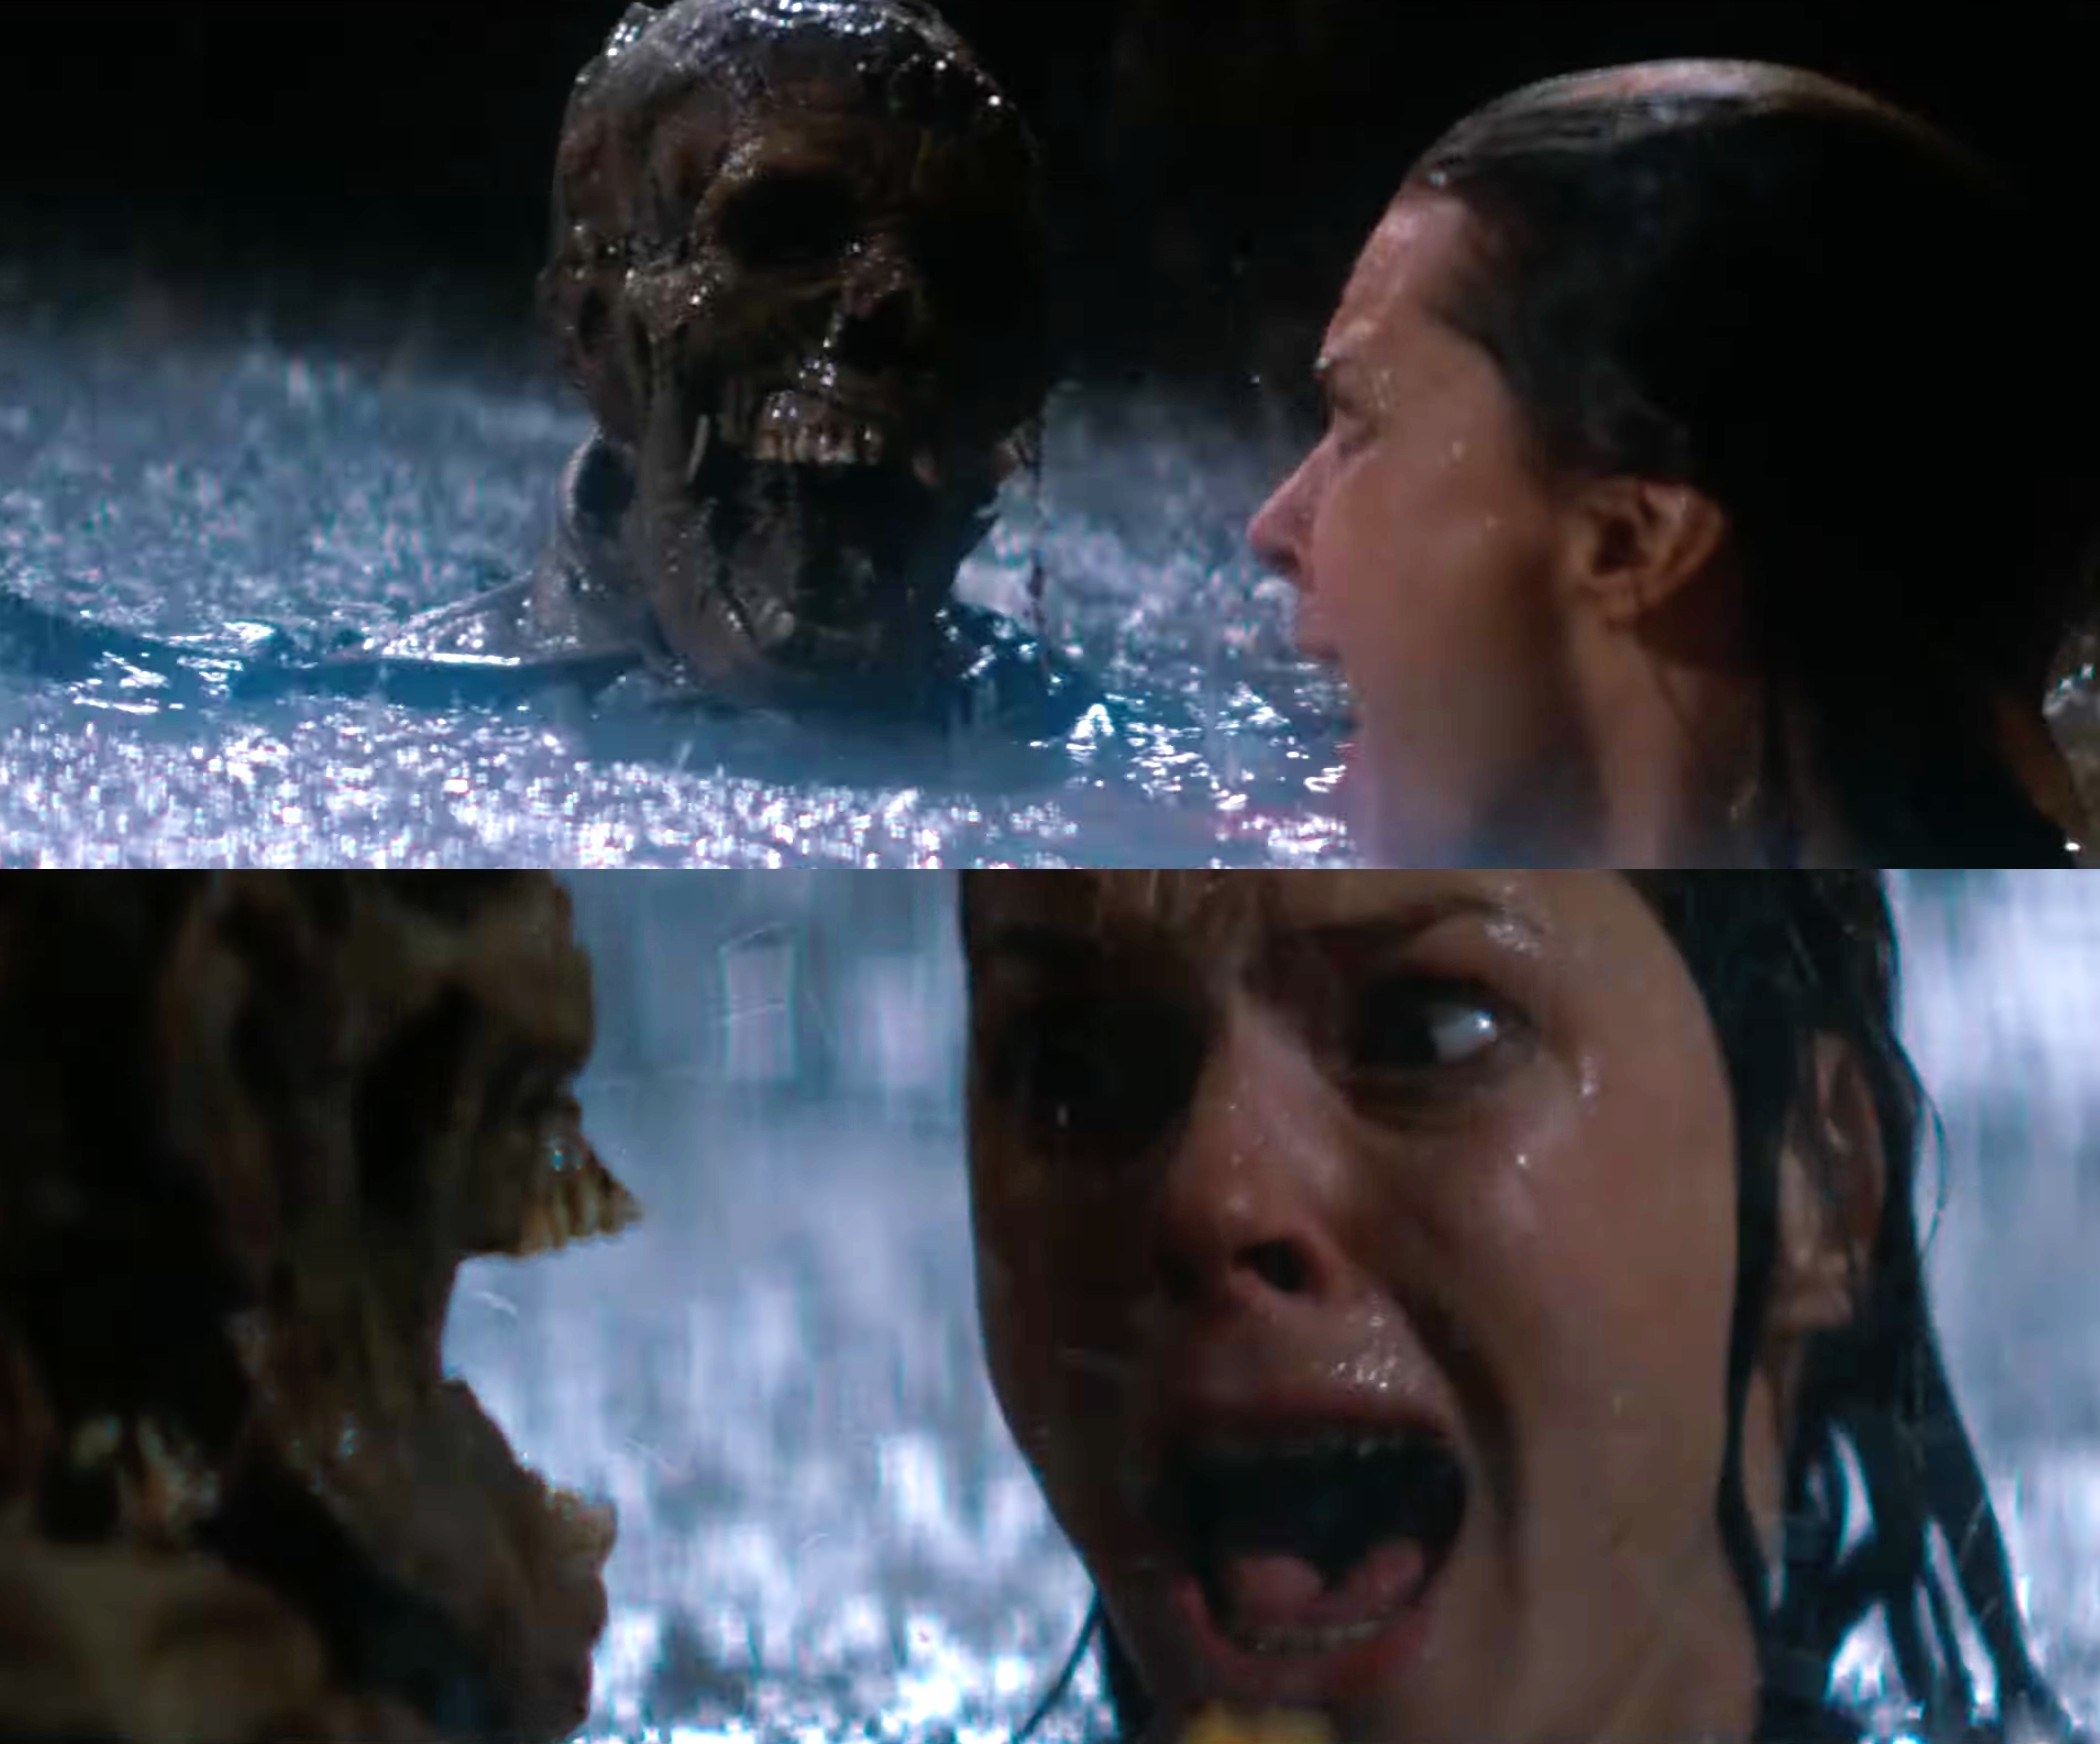 jobeth williams reacting to skeletons in the pool in poltergeist